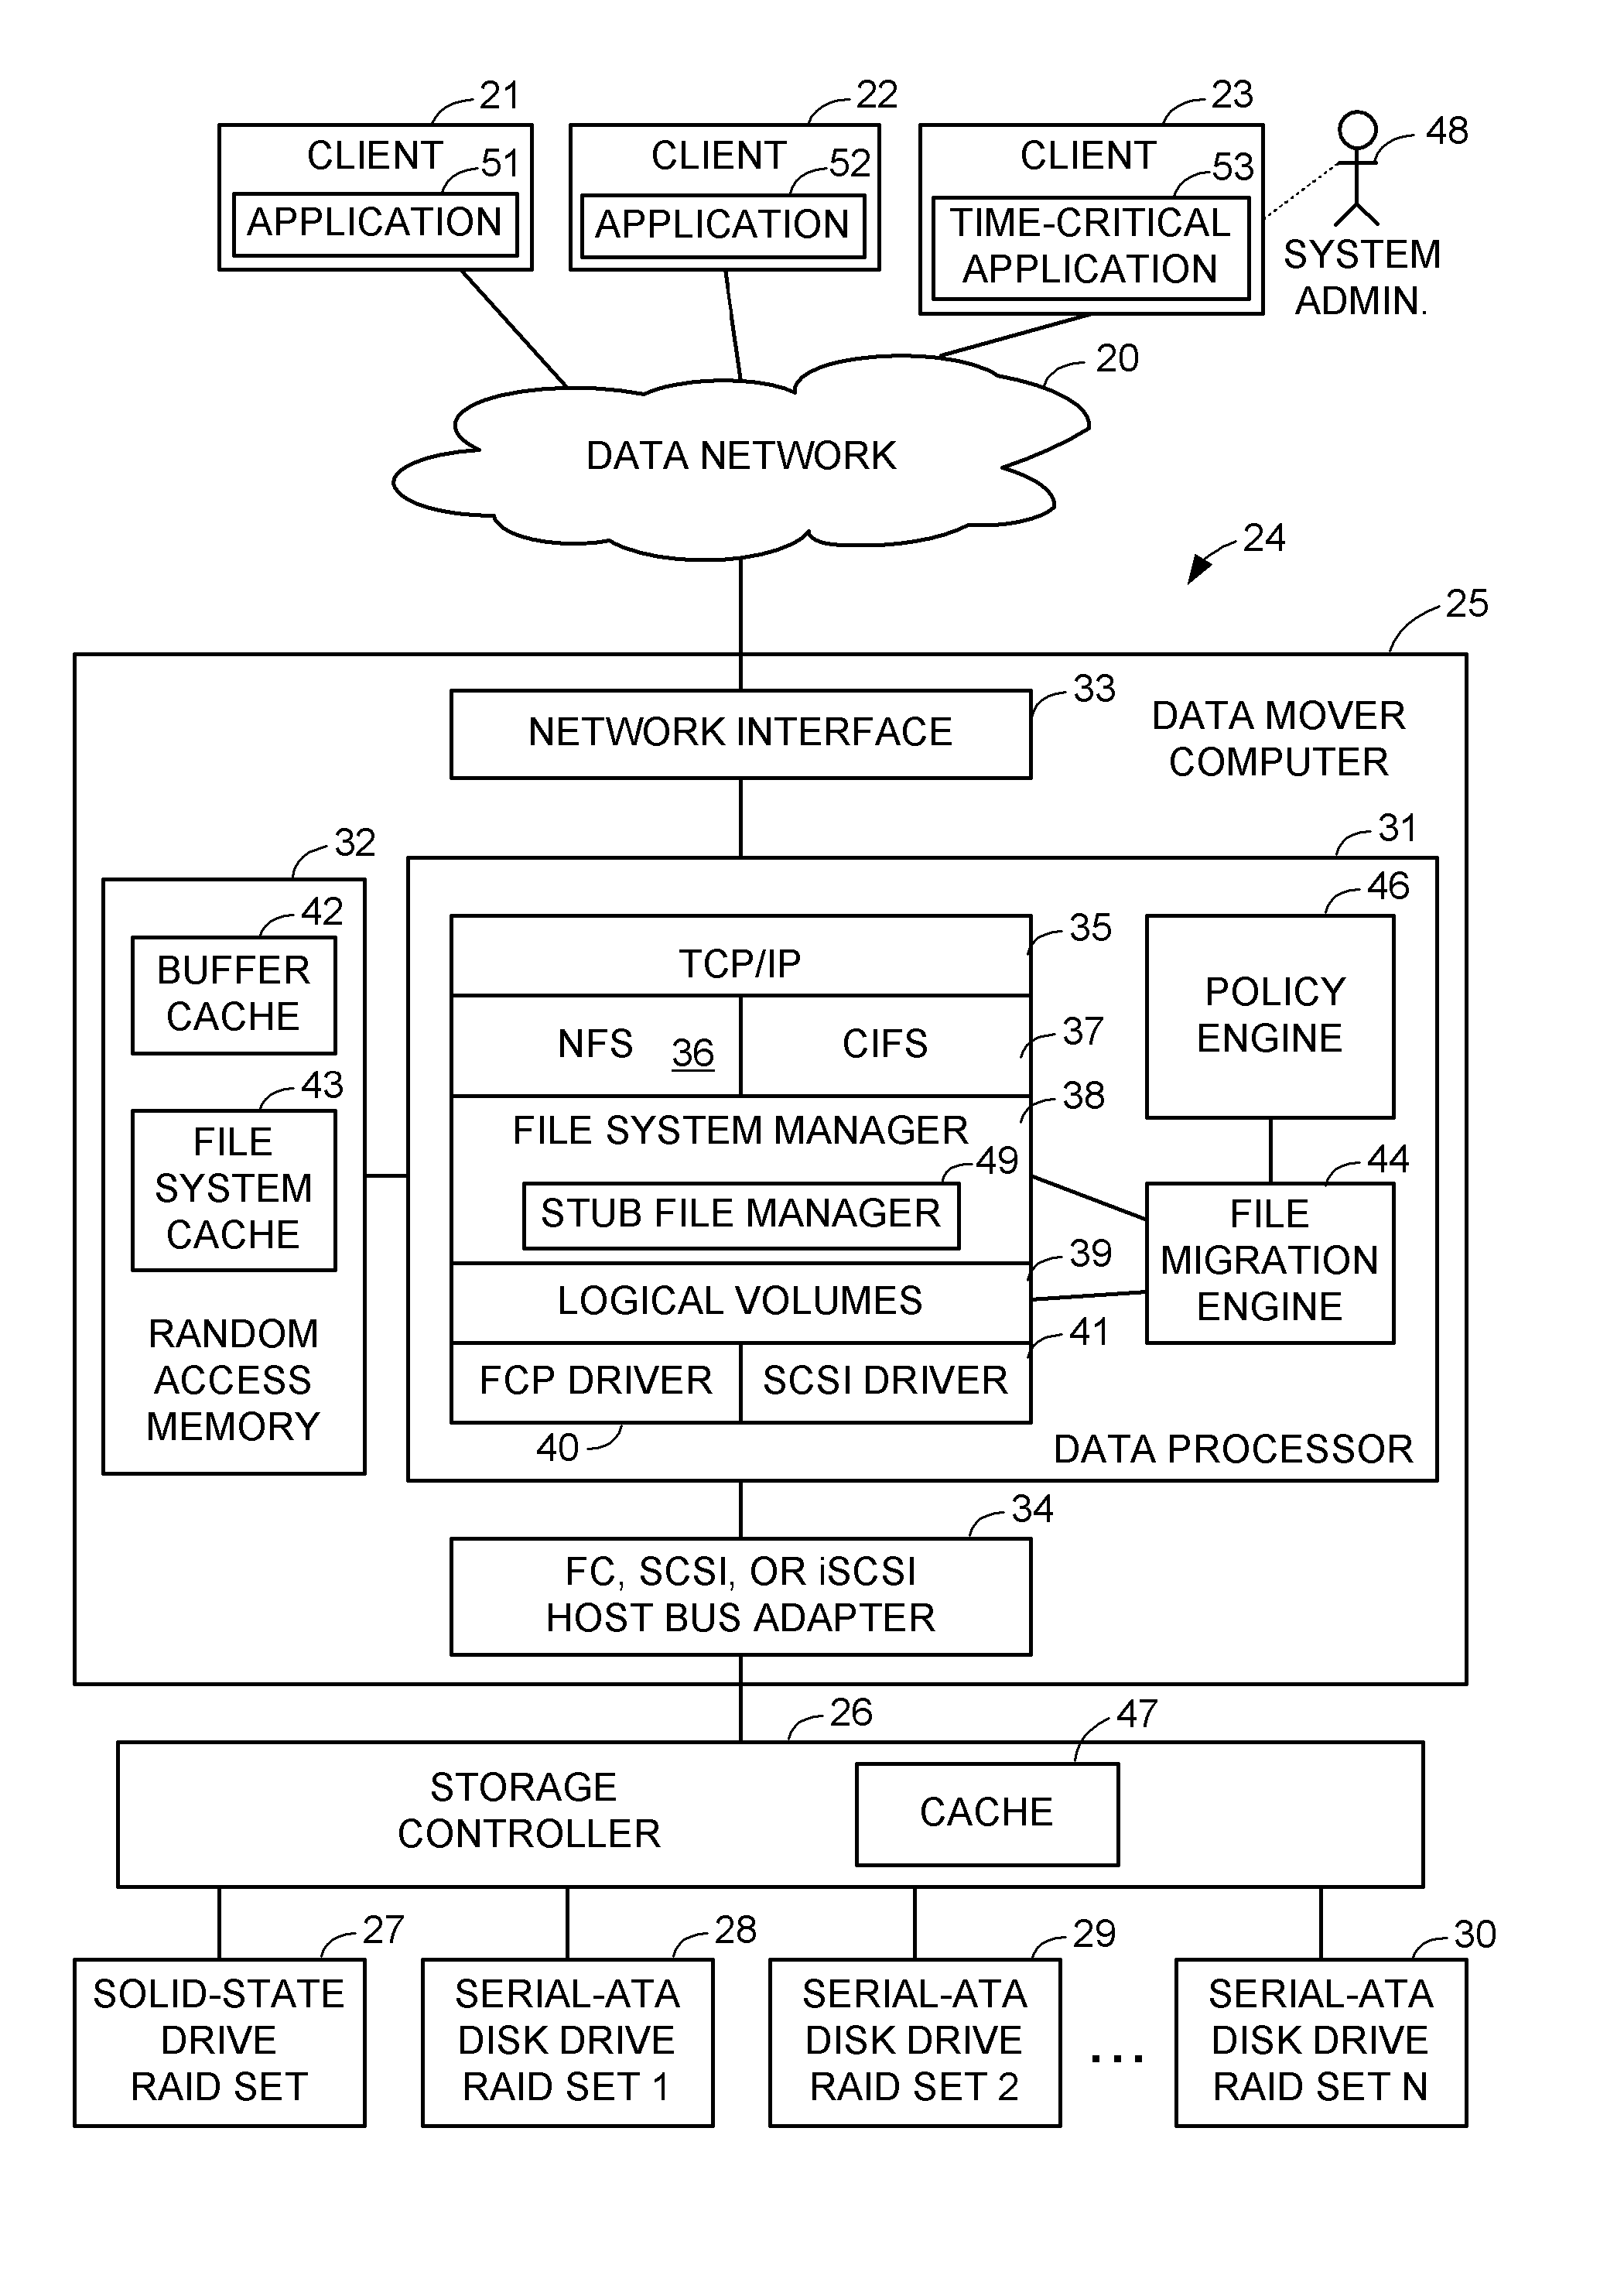 File server system having tiered storage including solid-state drive primary storage and magnetic disk drive secondary storage